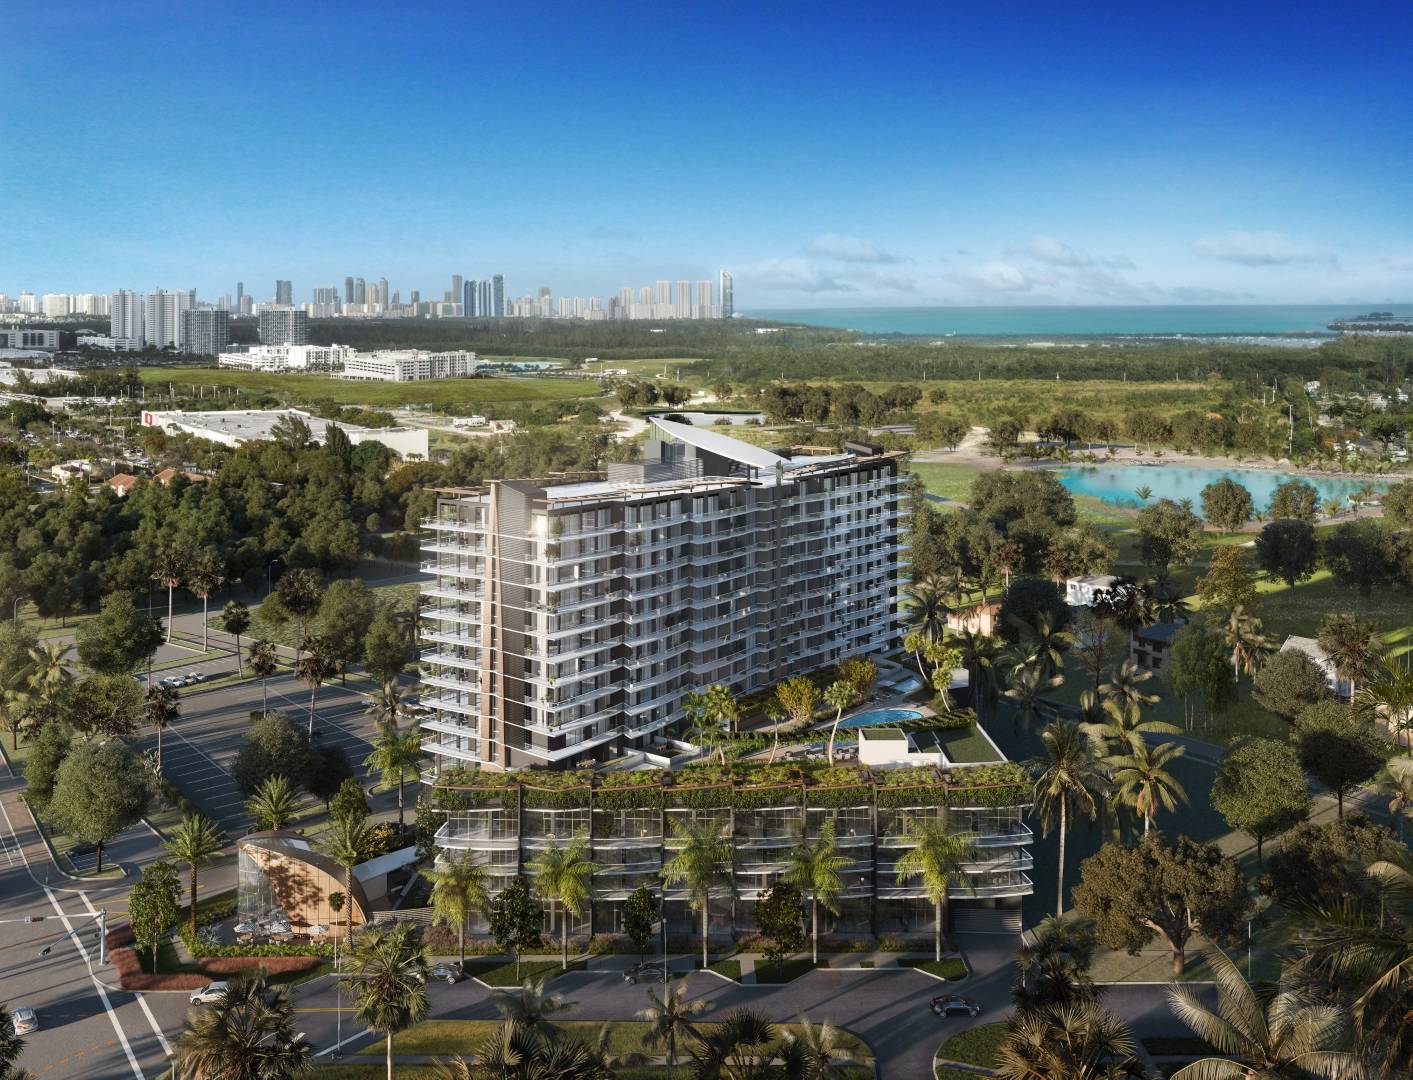 NEW LUXURY NORTH MIAMI BEACH RESIDENCE - 1BED WITH 2BATH - EB5 VISAS APPROVED